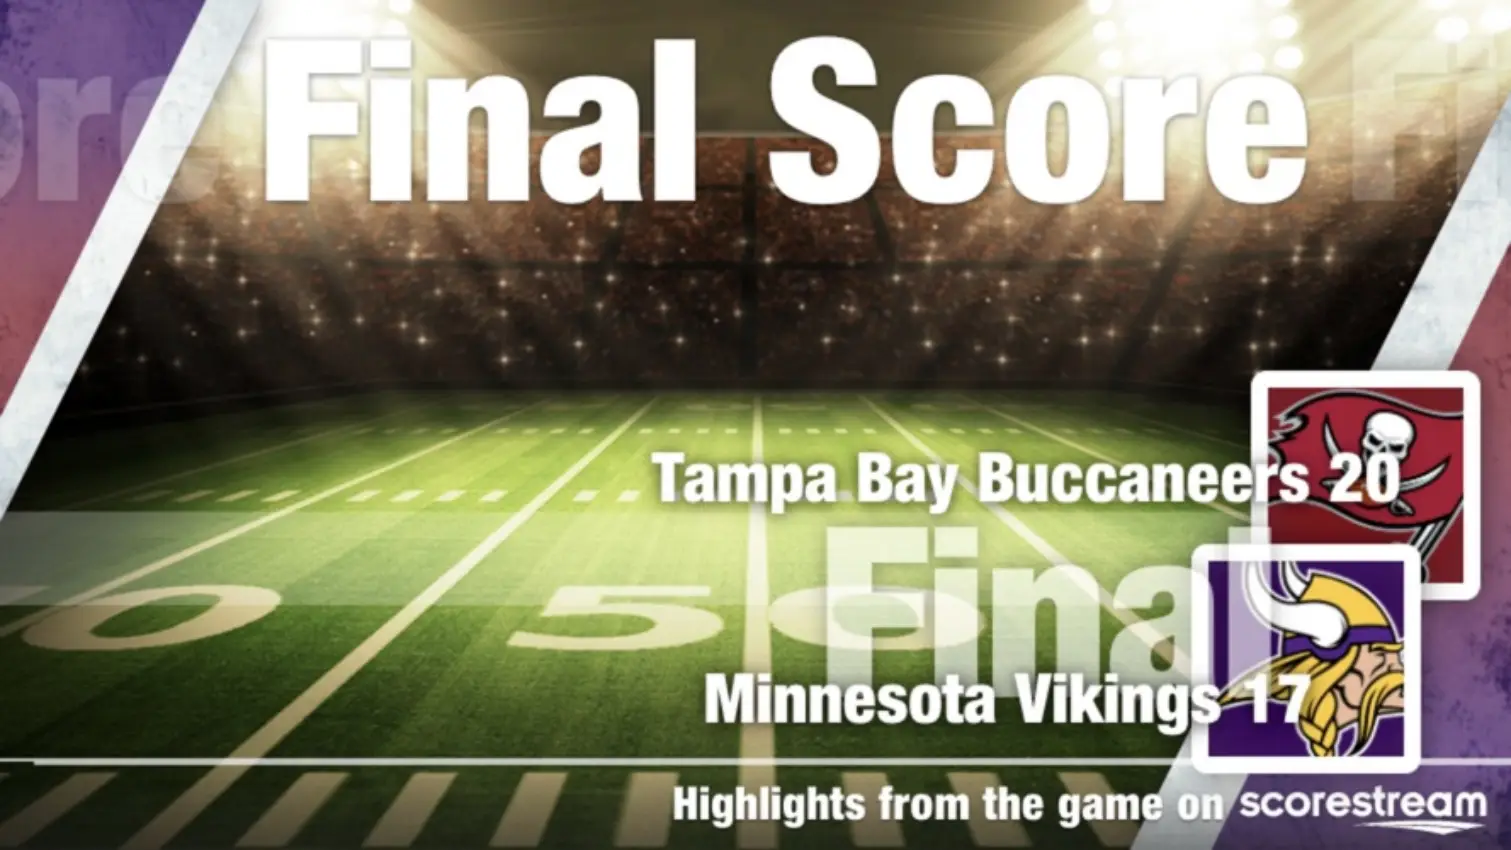 Tampa Bay Buccaneers had a 20-17 win over the Minnesota Vikings